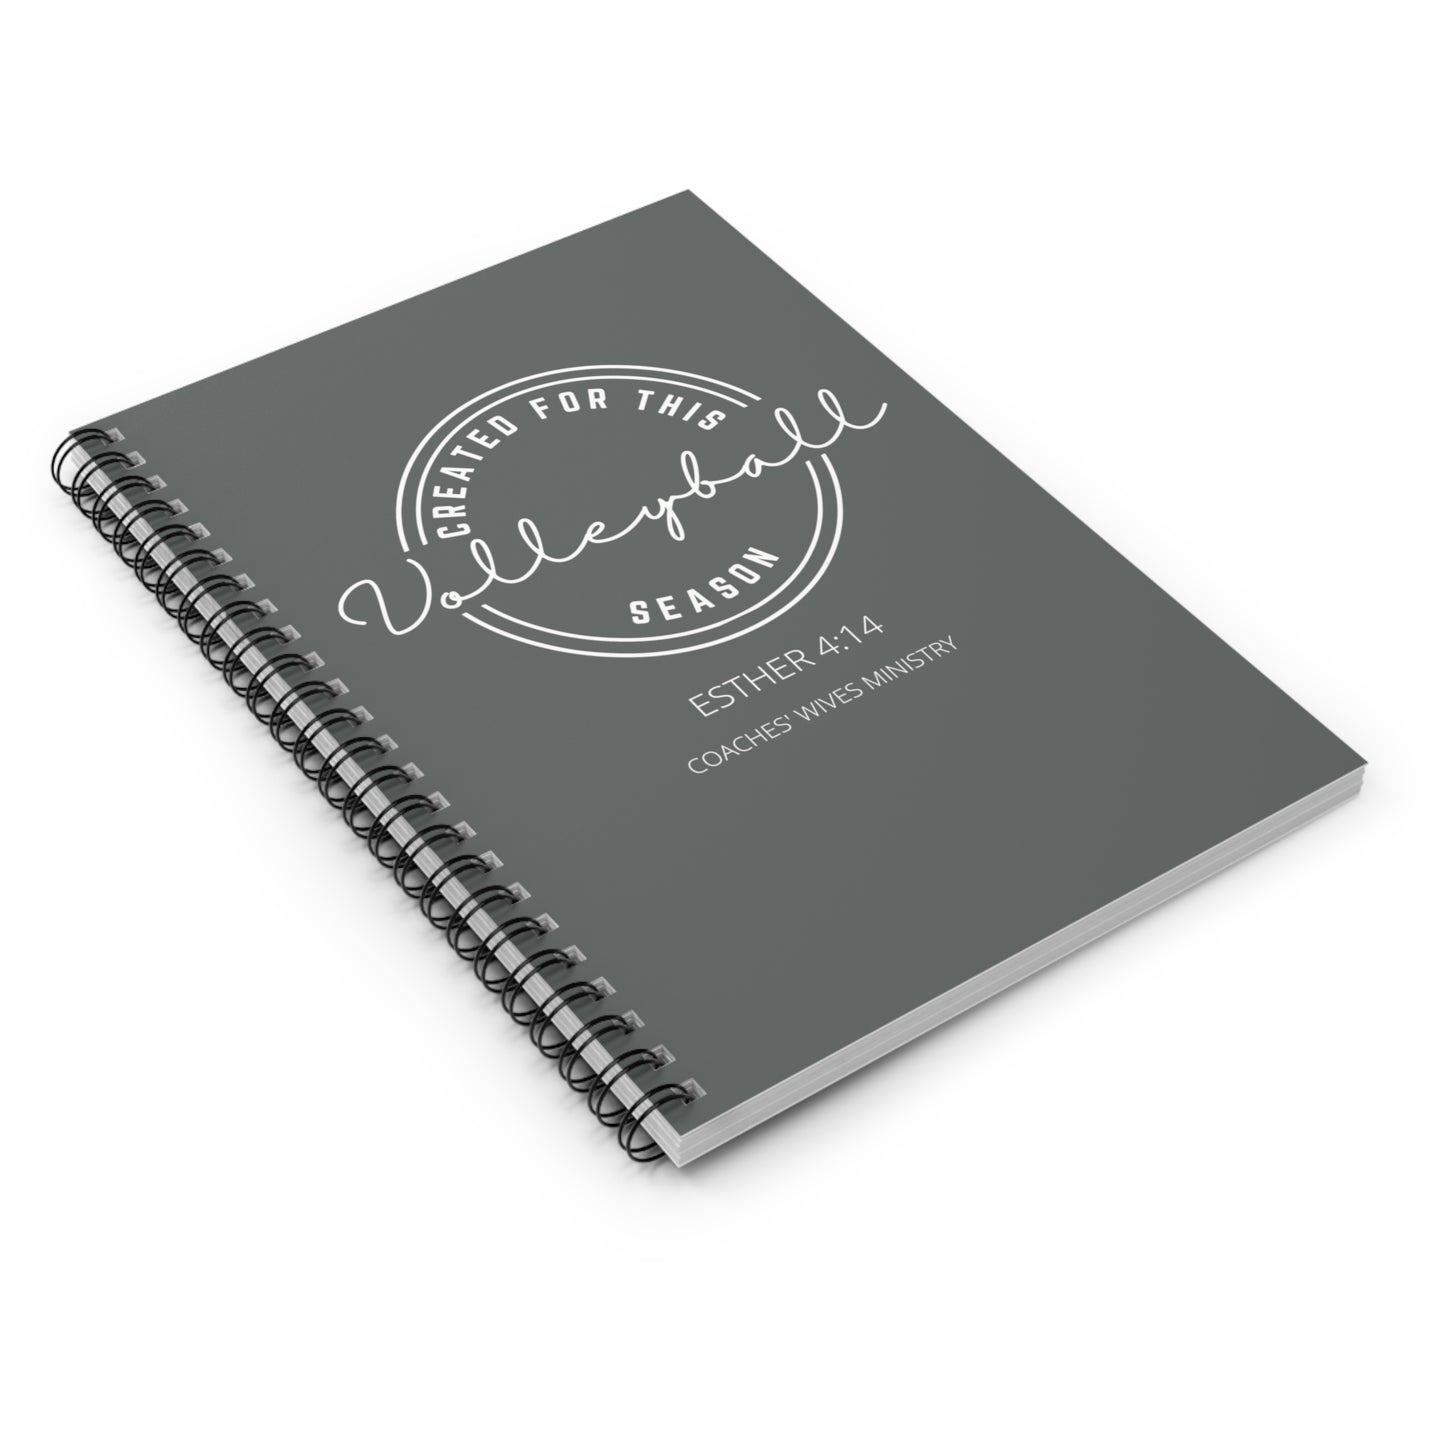 Created For This Season, Volleyball, Spiral Notebook - Ruled Line